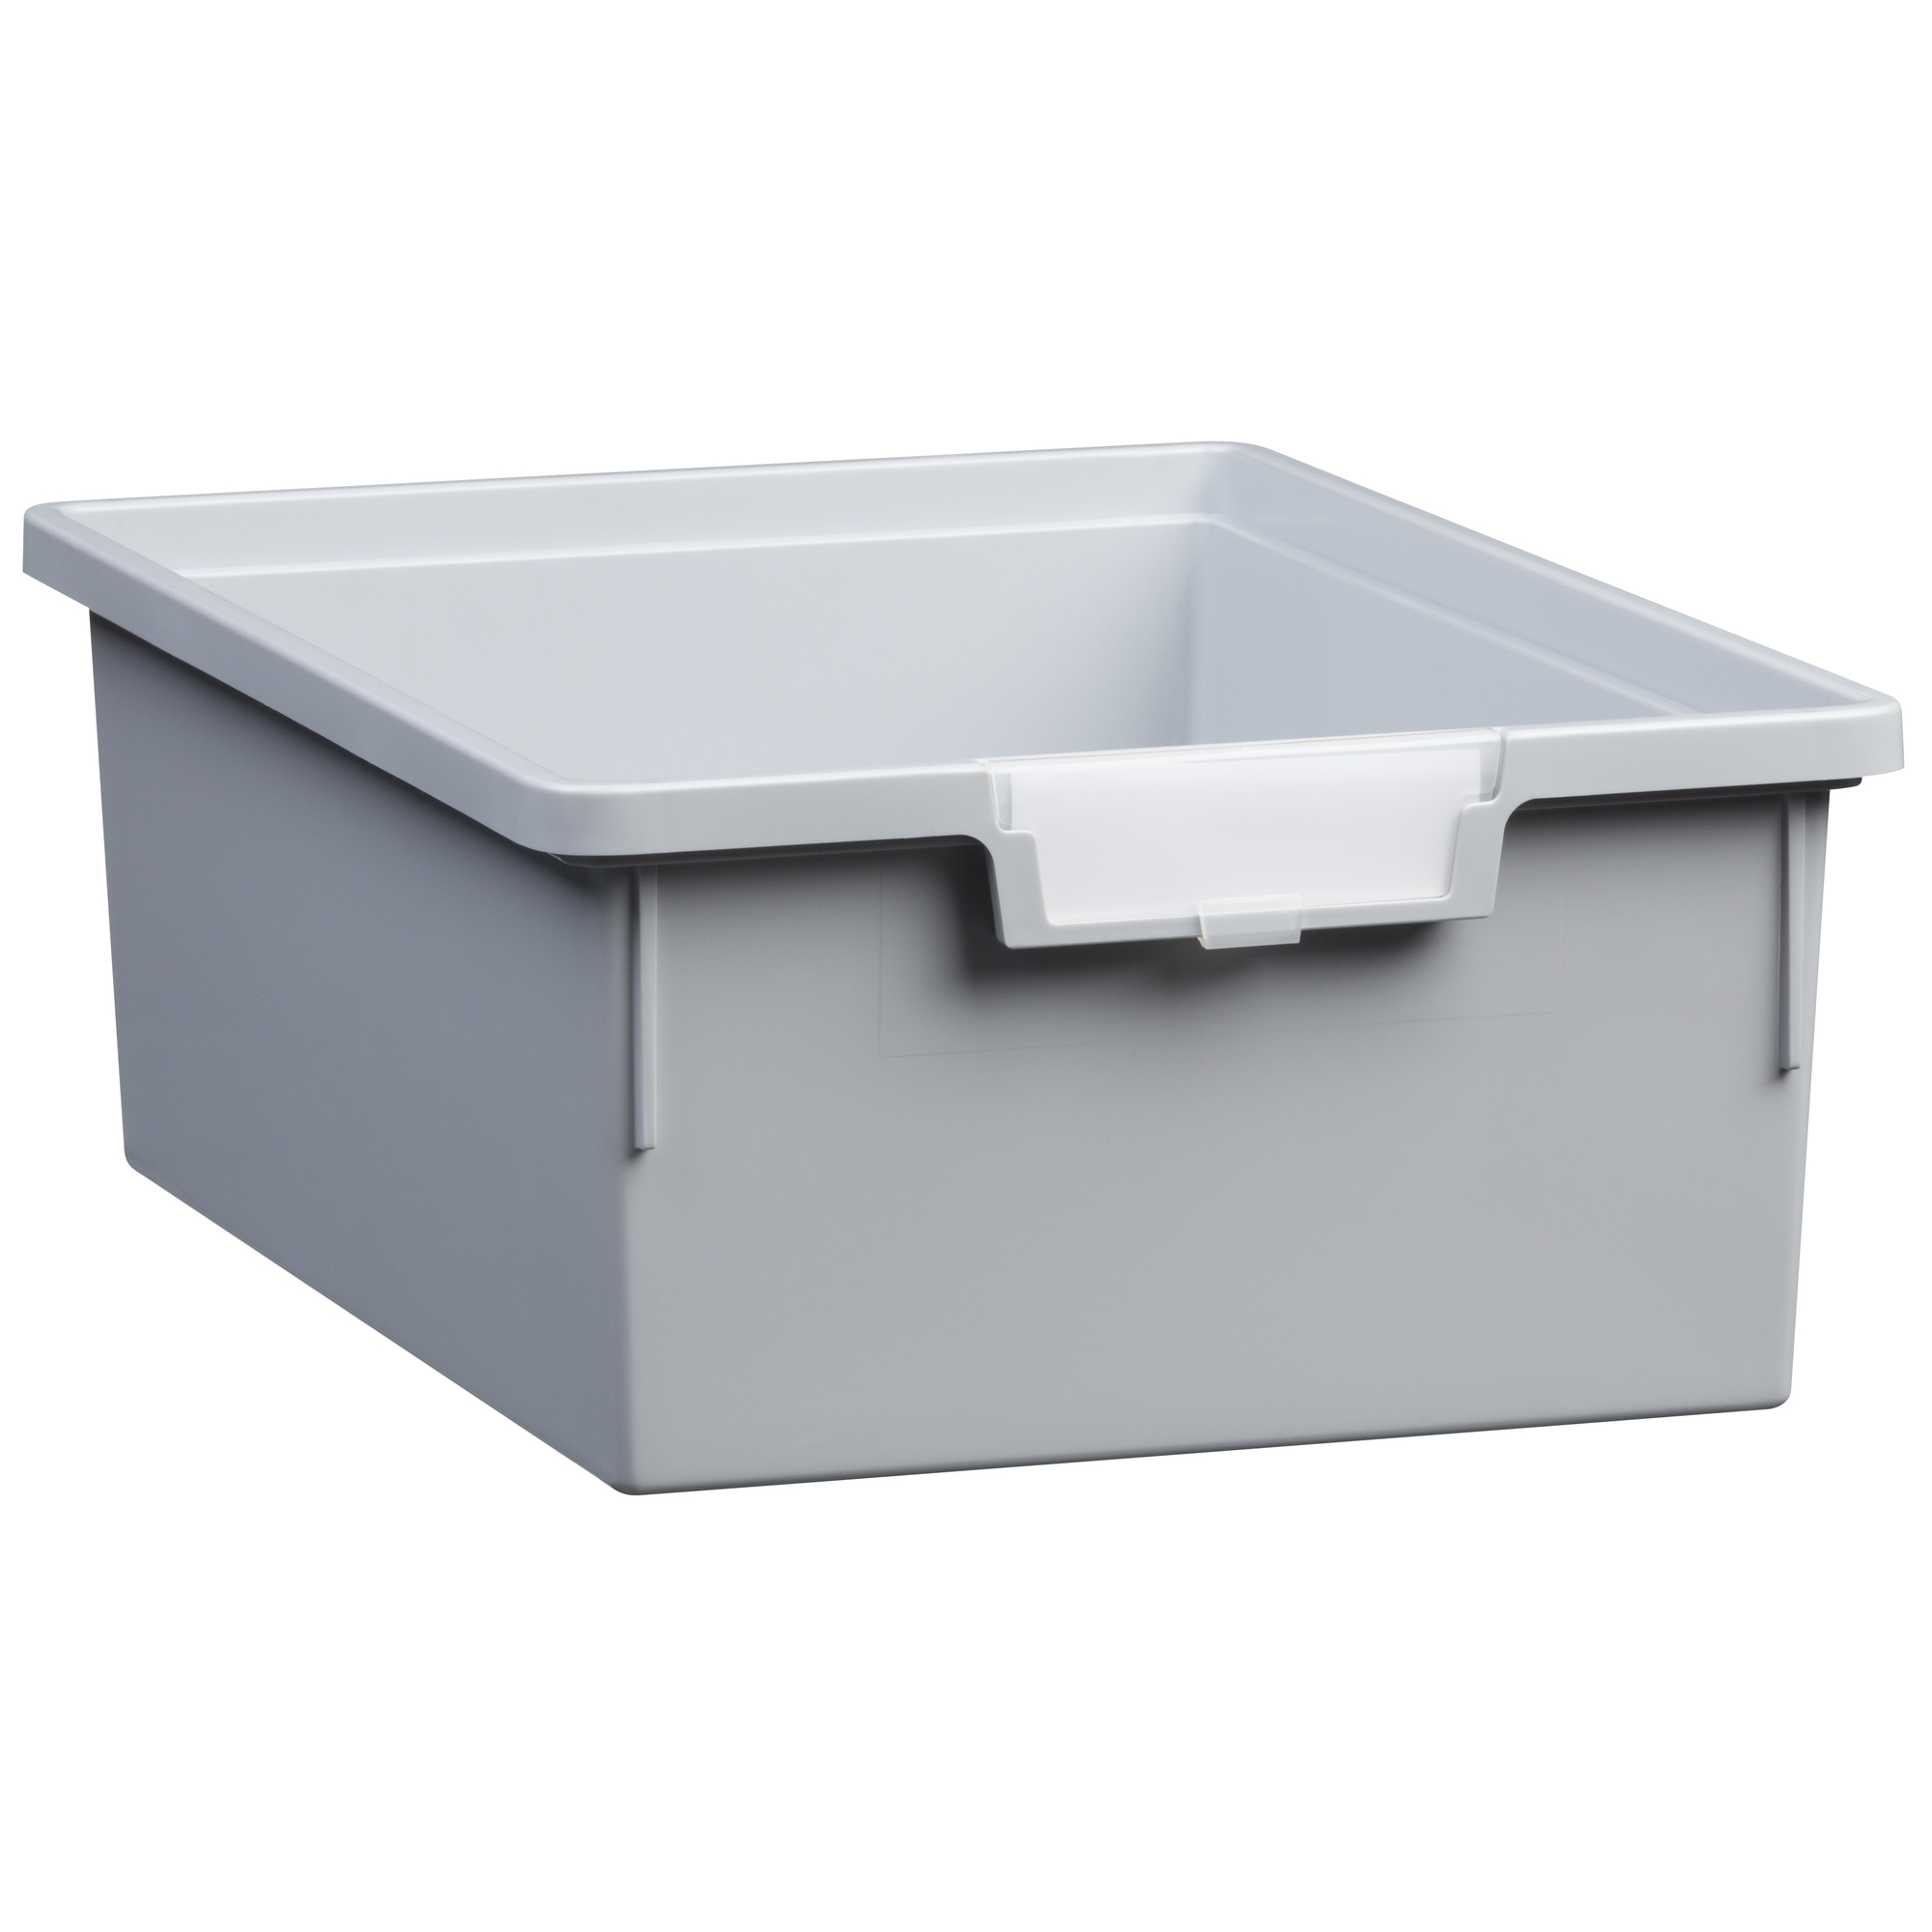 Certwood StorWerks, Slim Line 6Inch Tray in Light Gray-3PK, Included (qty.) 3 Height 6 in, Model CE1952LG3